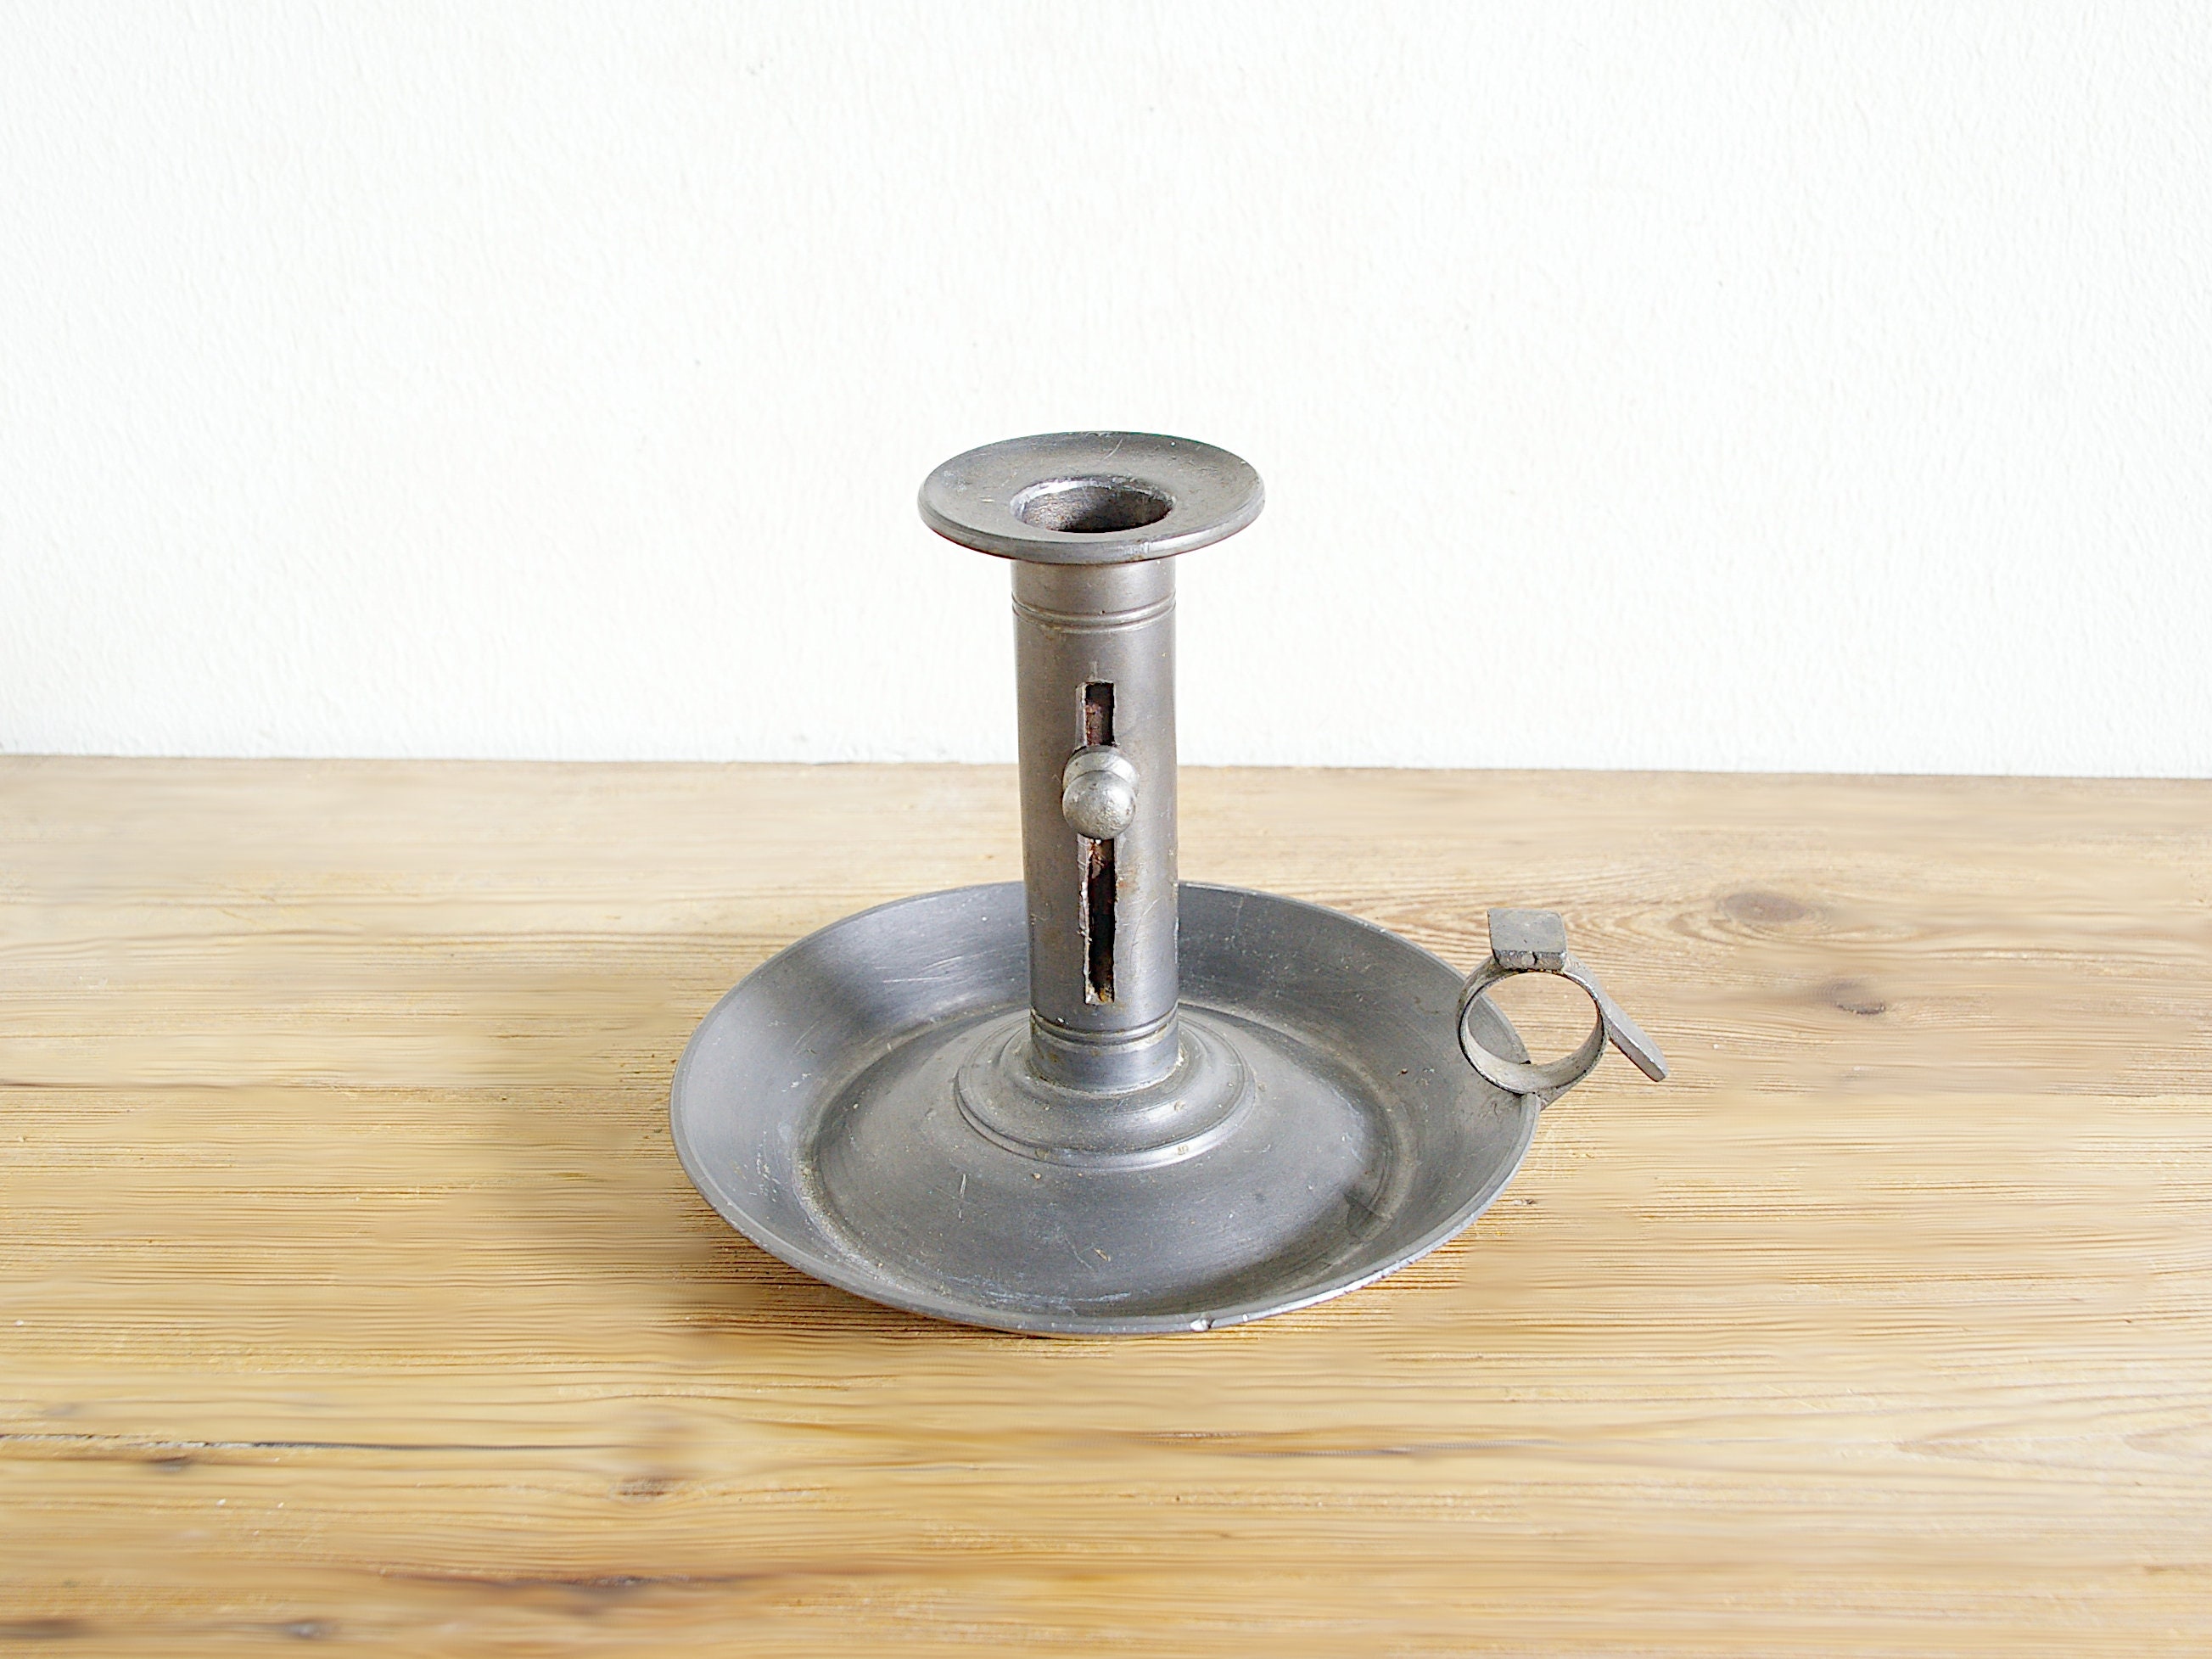 Vintage Pewter Chamber Candlestick, Candle Holder Simple, Scandinavia Home  Decor, Primitive Rustic, Hygge Cozy, Bedside Table Decor, Shelf 